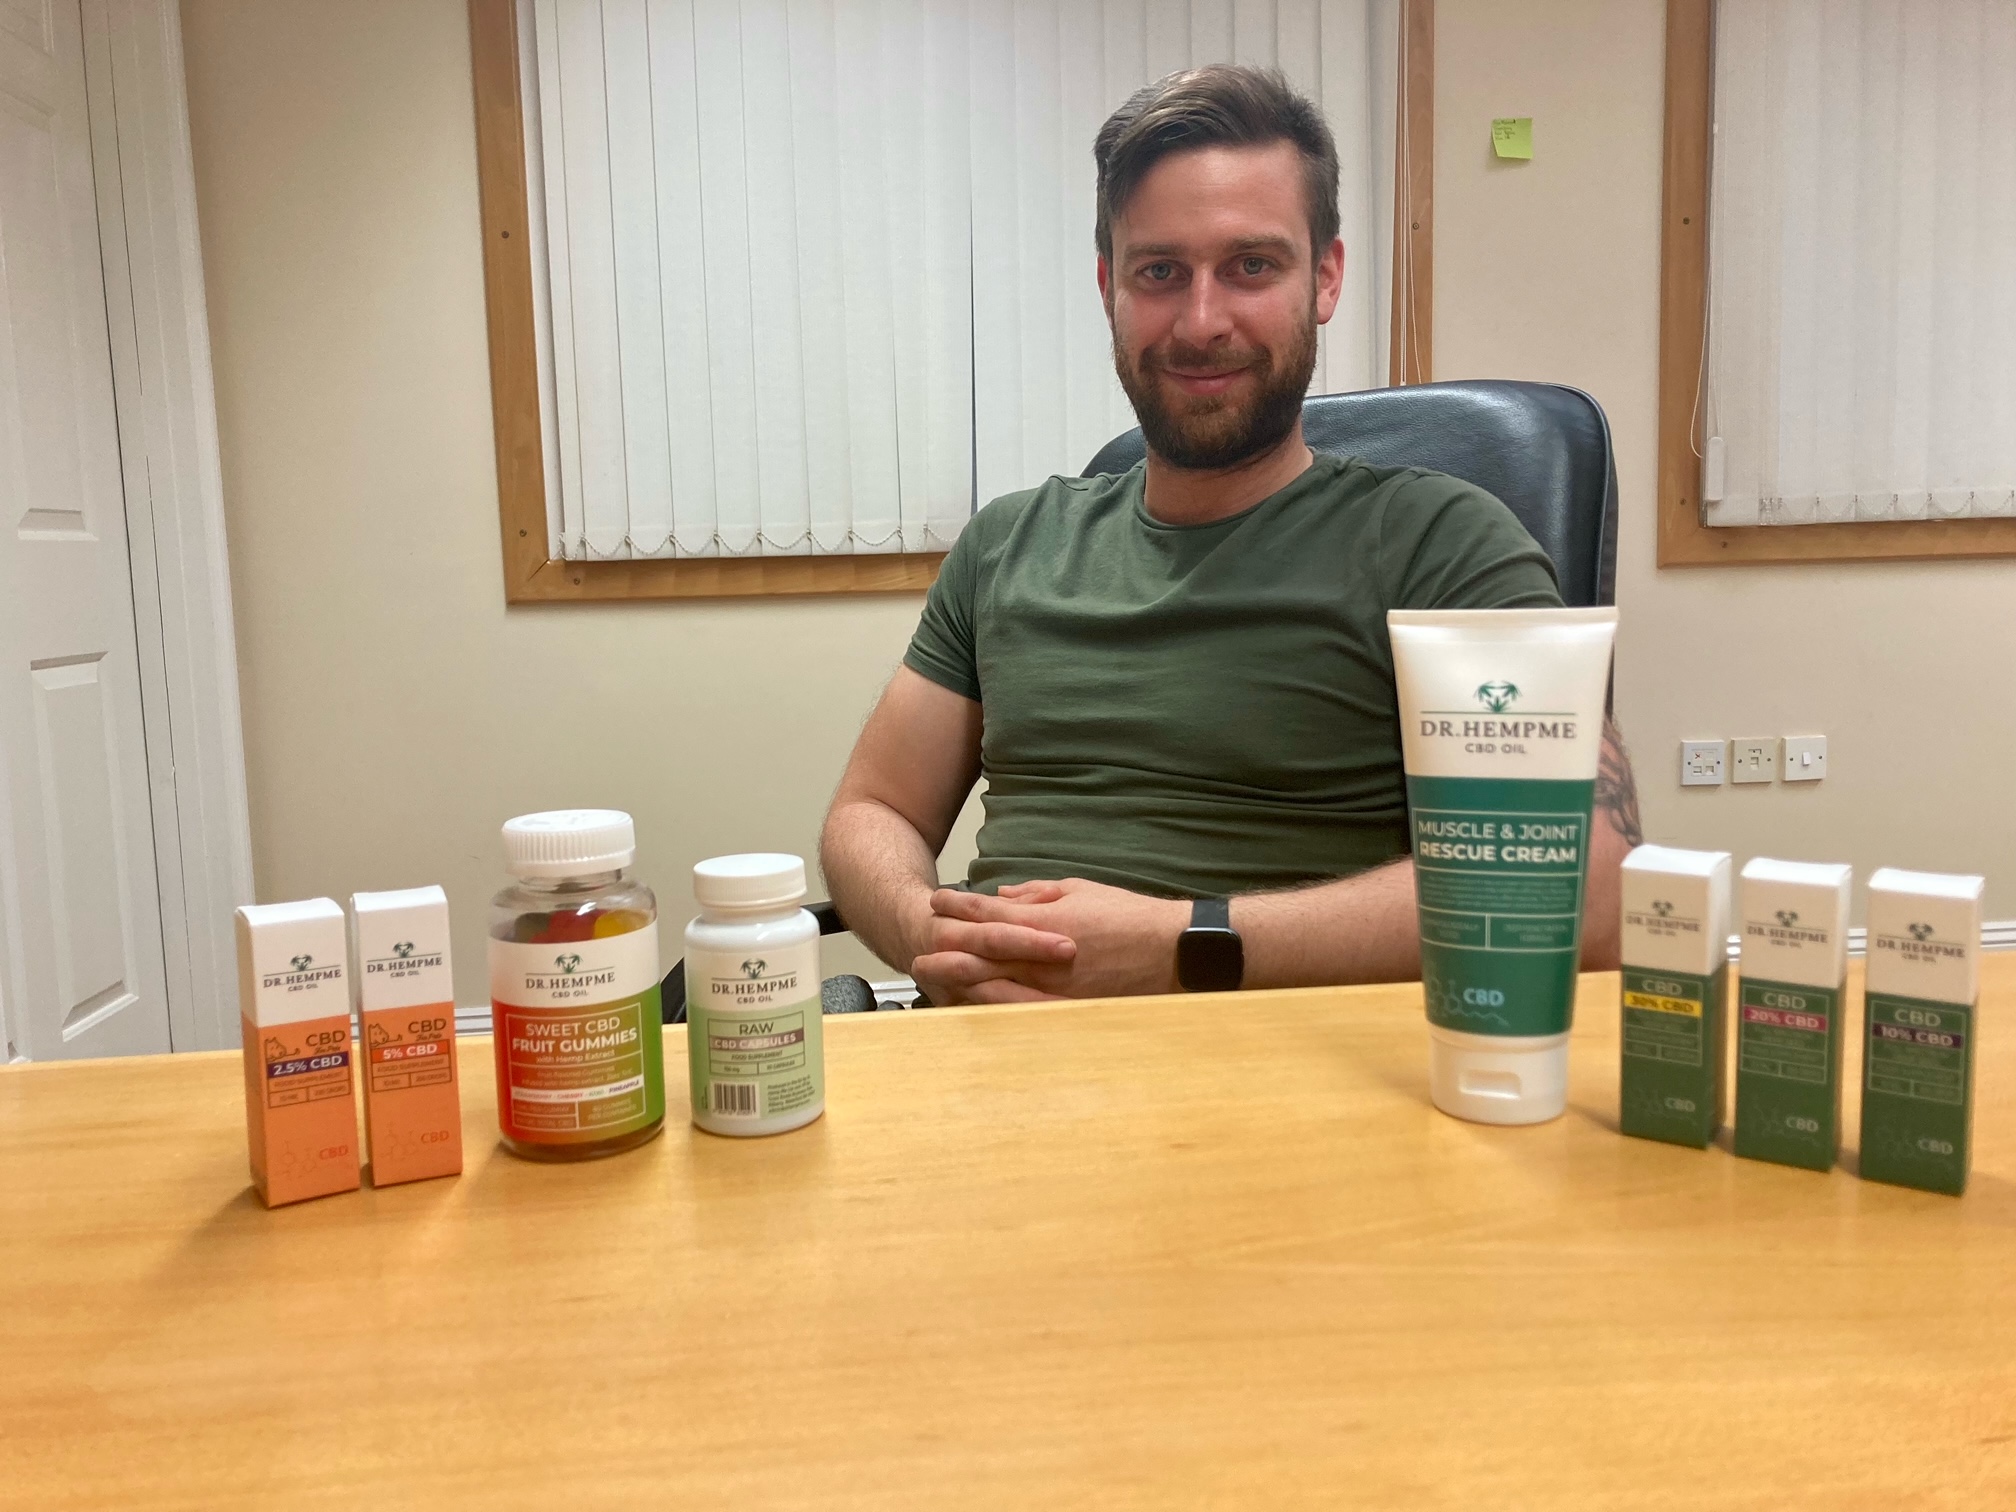 Limerick CBD Oil Supplements – Dr Hemp Me is the business taking Ireland by storm with their incredible range of beneficial CBD supplements. Pictured above is Brian Cusack, founder of Dr. Hemp Me